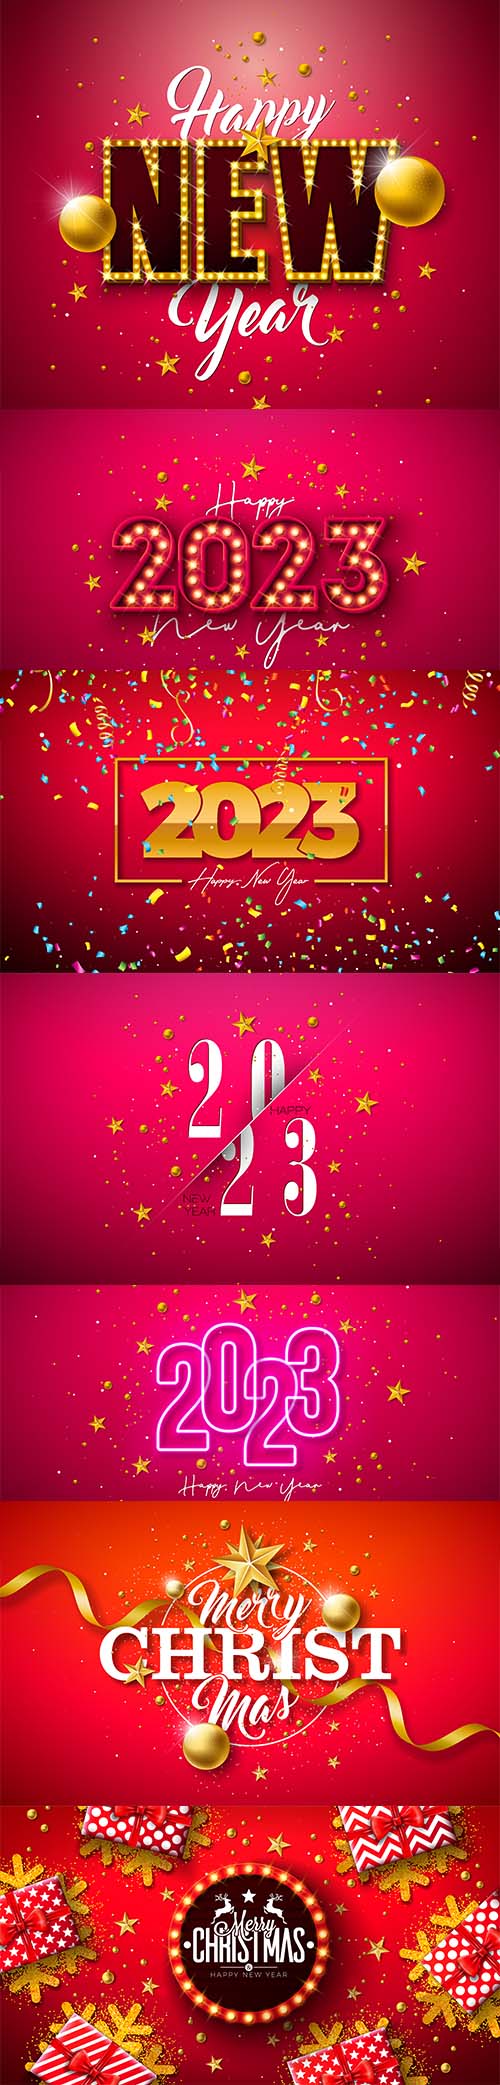 Merry christmas and happy new year 2023 illustration with gold glass ball